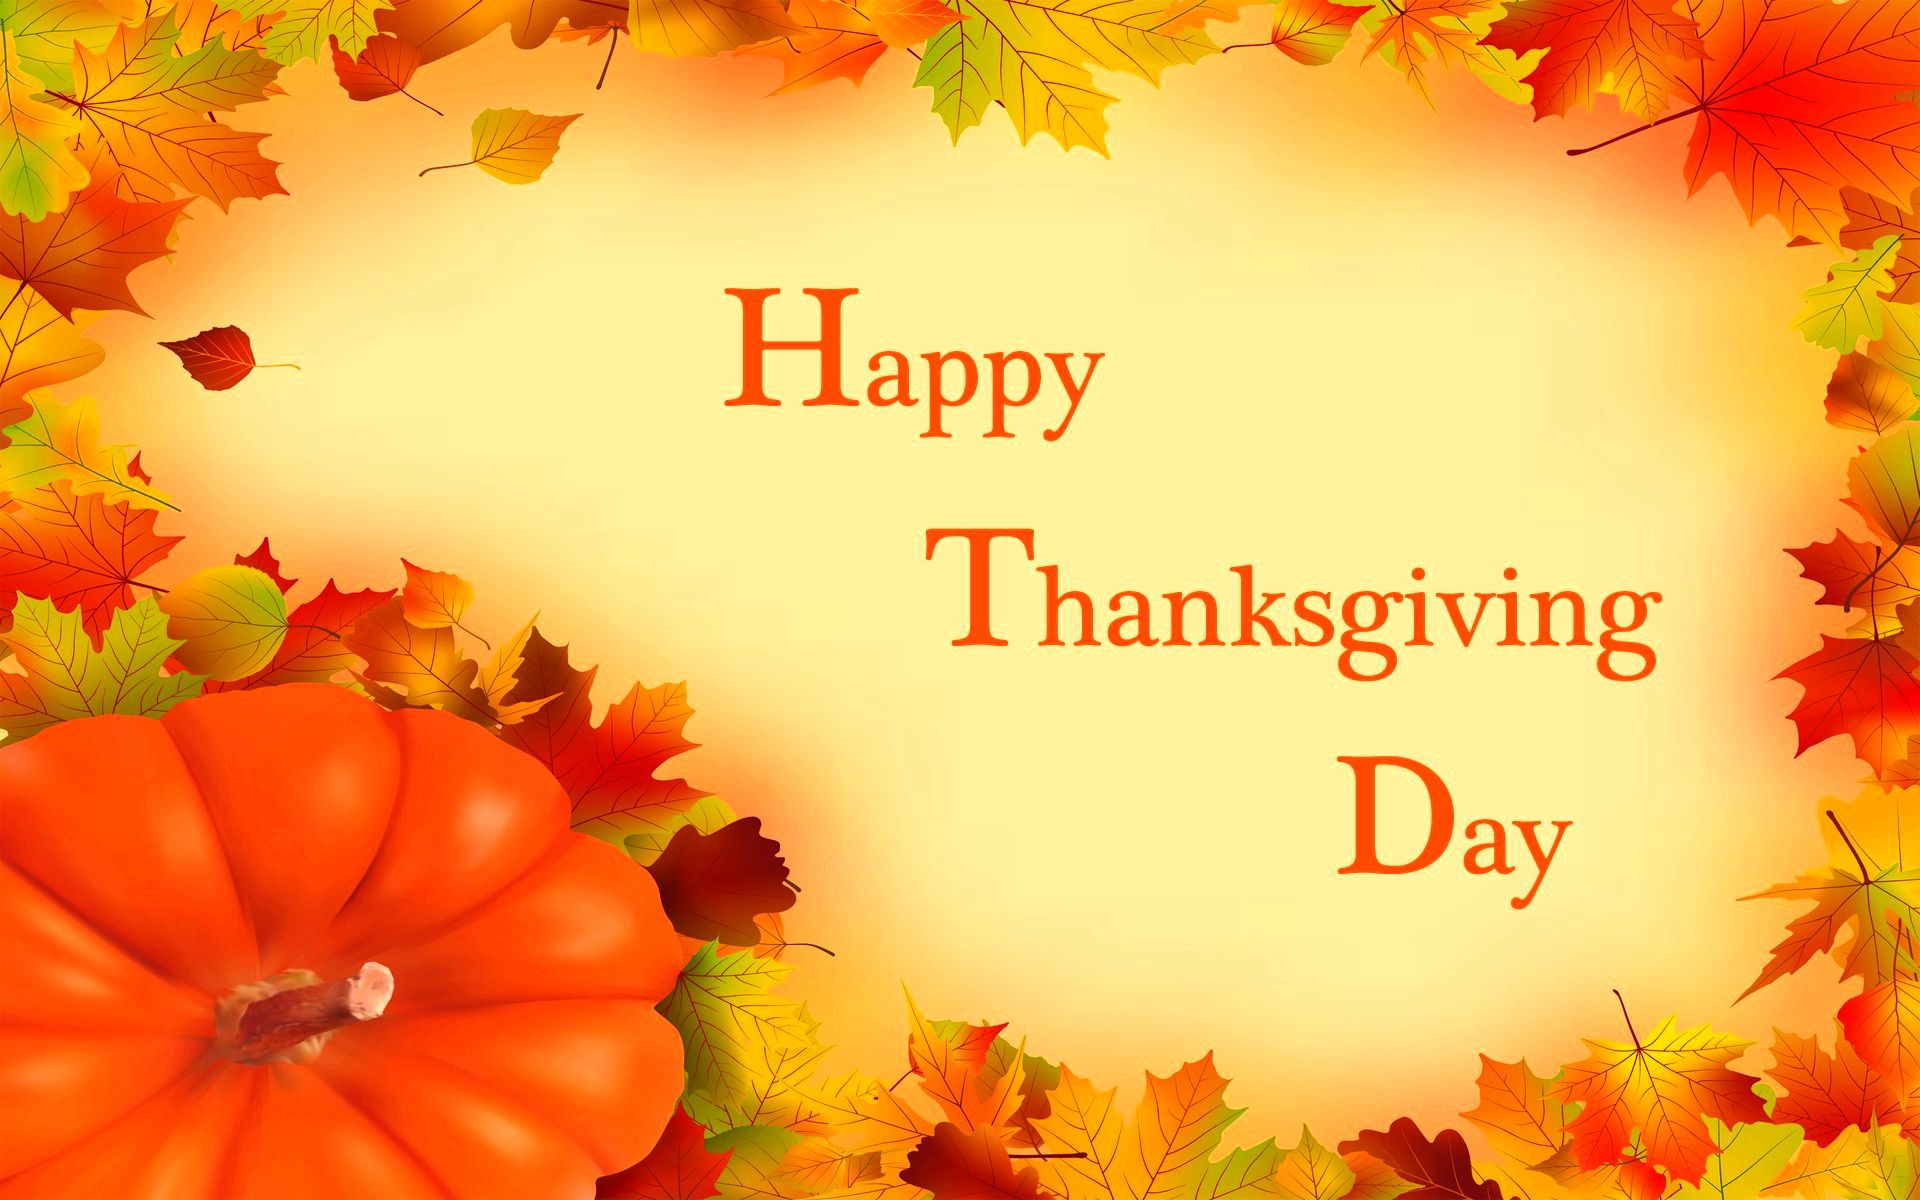 Happy thanksgiving day images pictures hd wallpapers 2016 happy